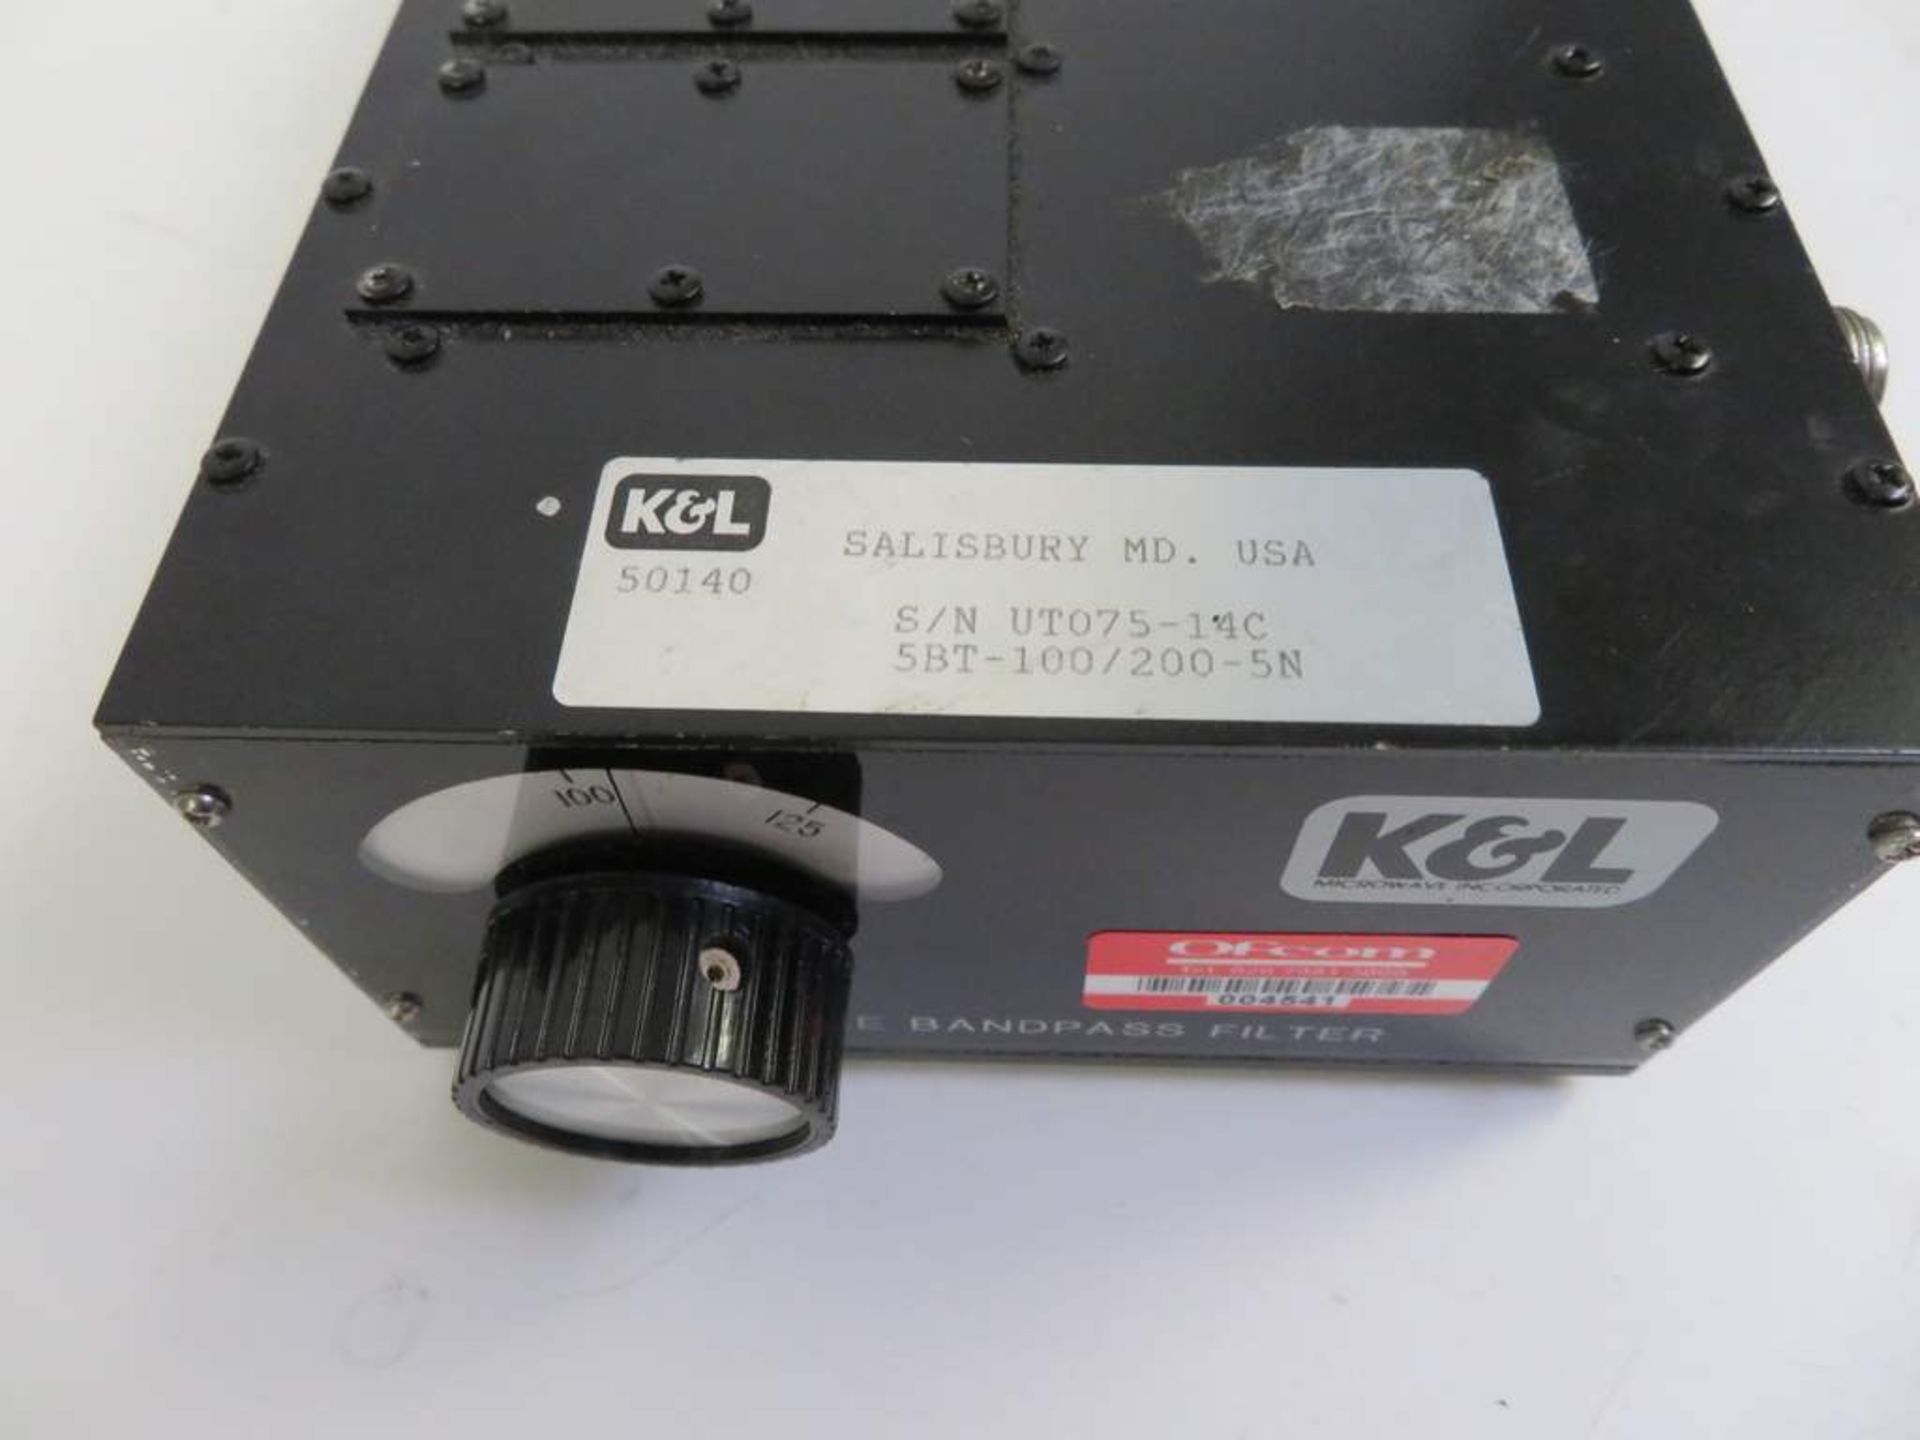 K&L 5BT-100/200-5N Tunable Bandpass Filter - Image 3 of 4